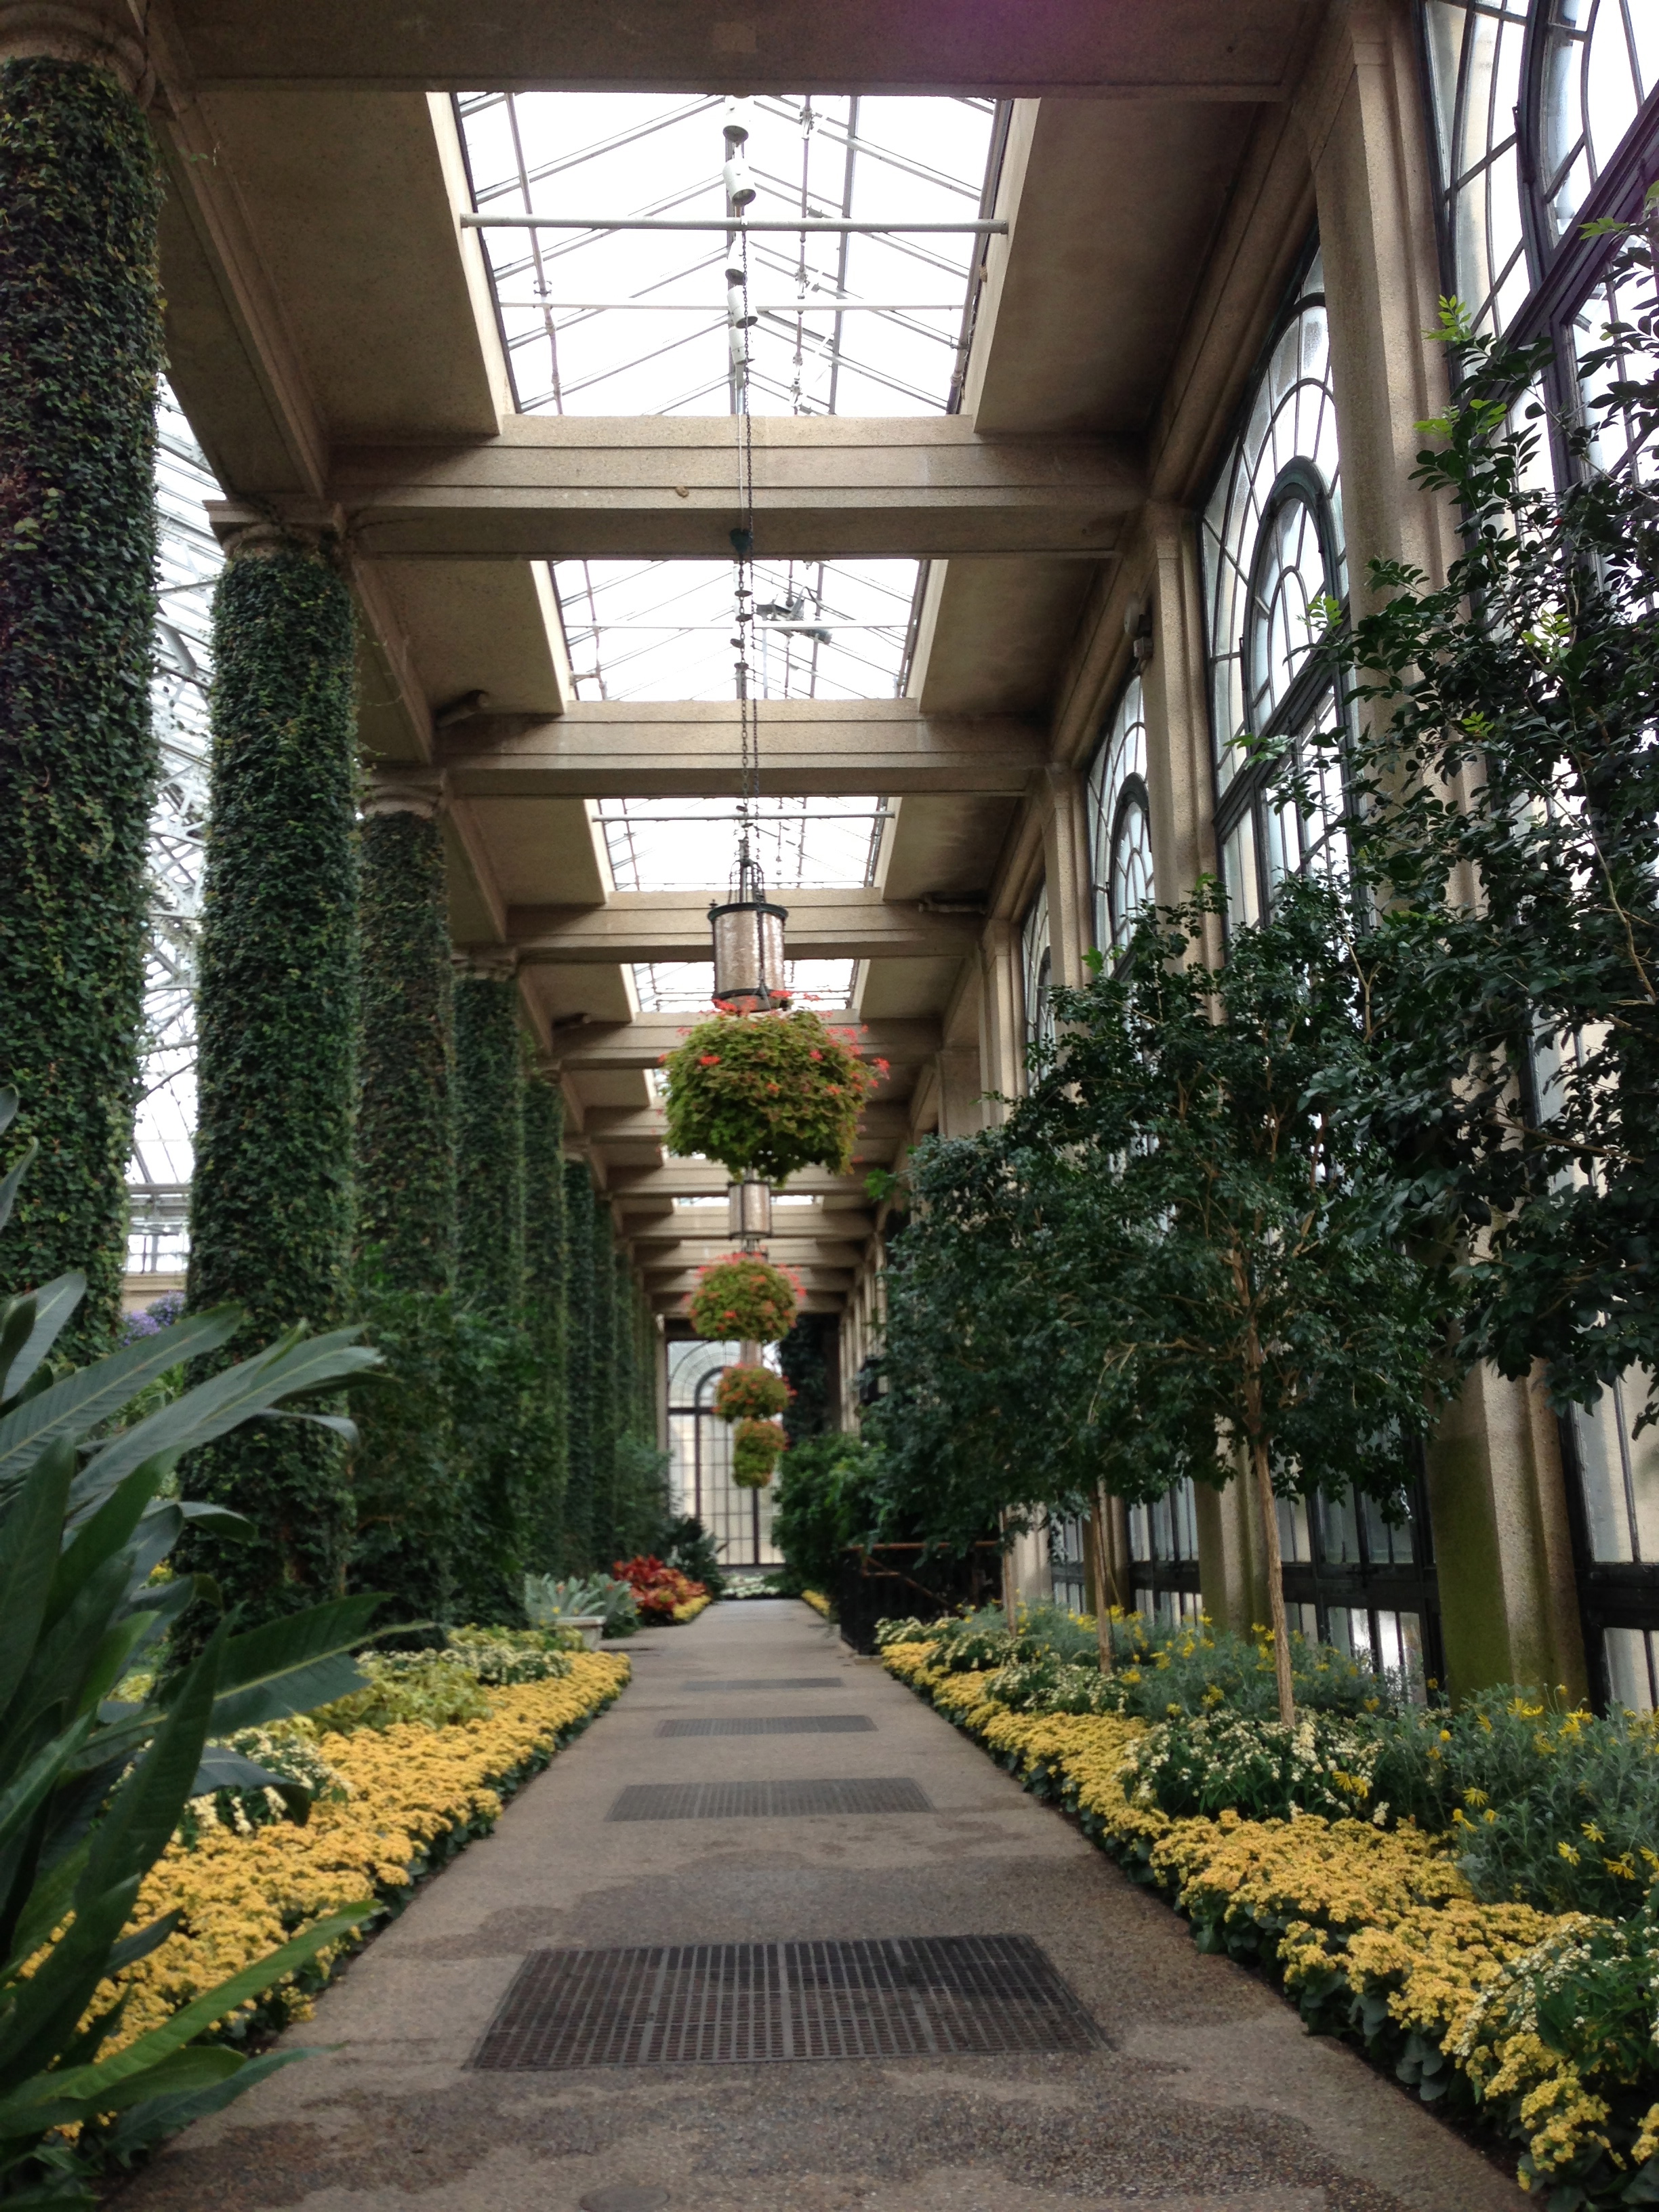 Luminous clarity, sparkling nature...the conservatory at Longwood Gardens